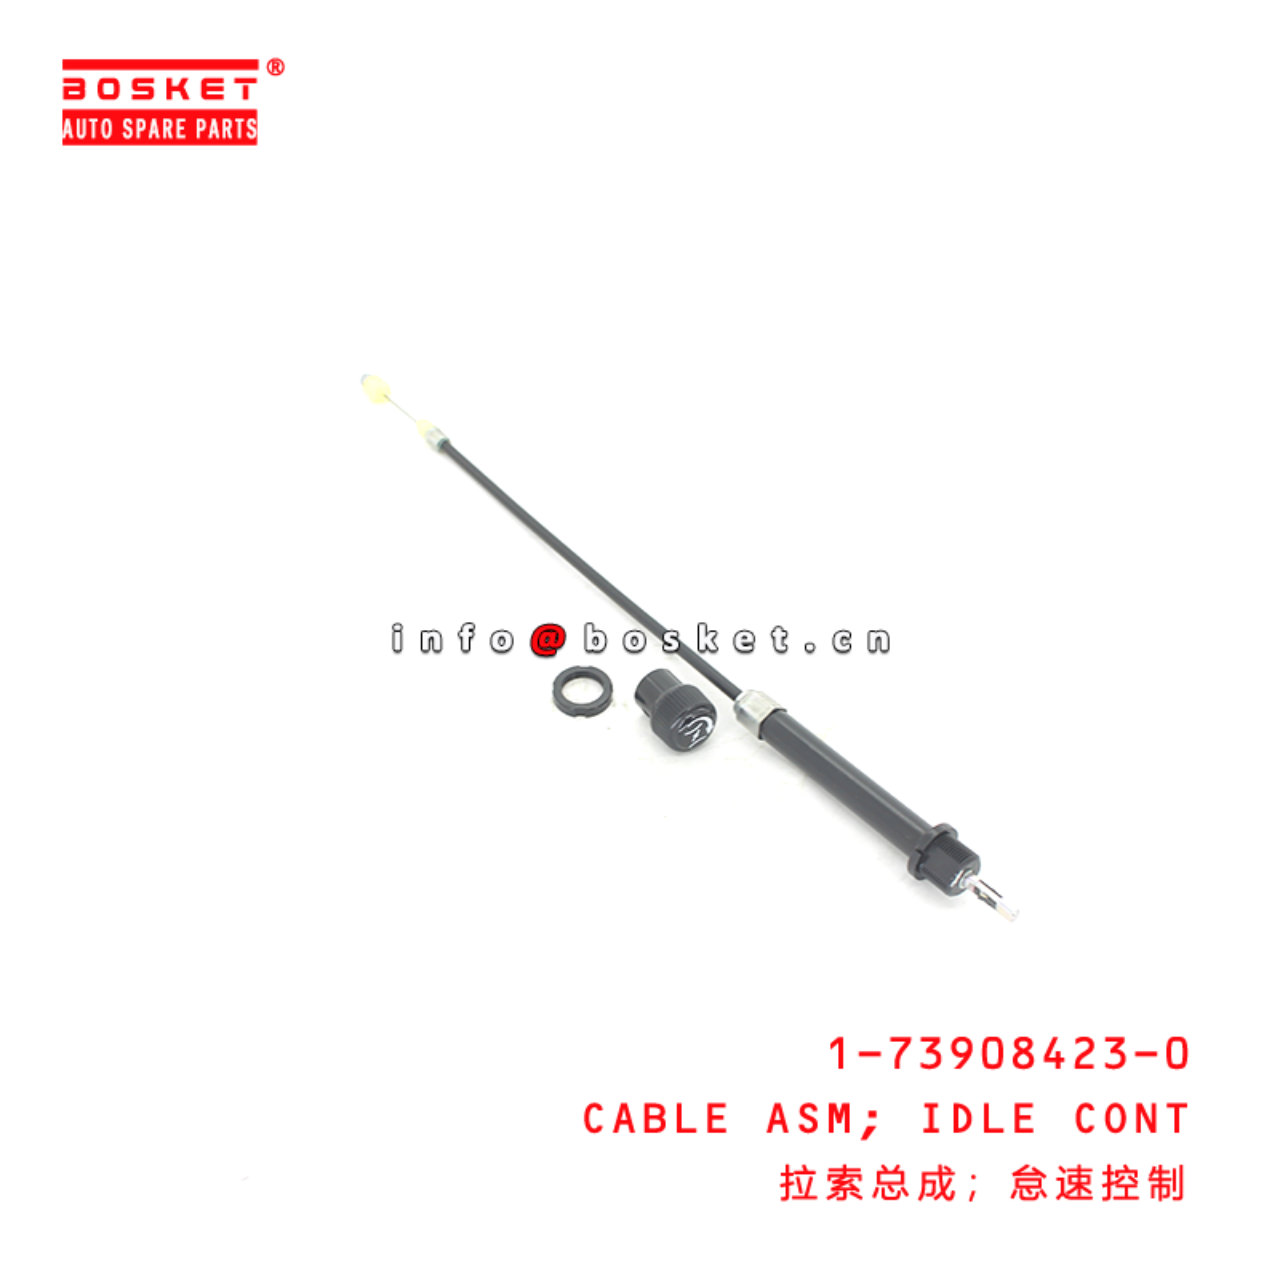 1-73908423-0 Idle Control Cable Assembly Suitable for ISUZU FVR34  1739084230